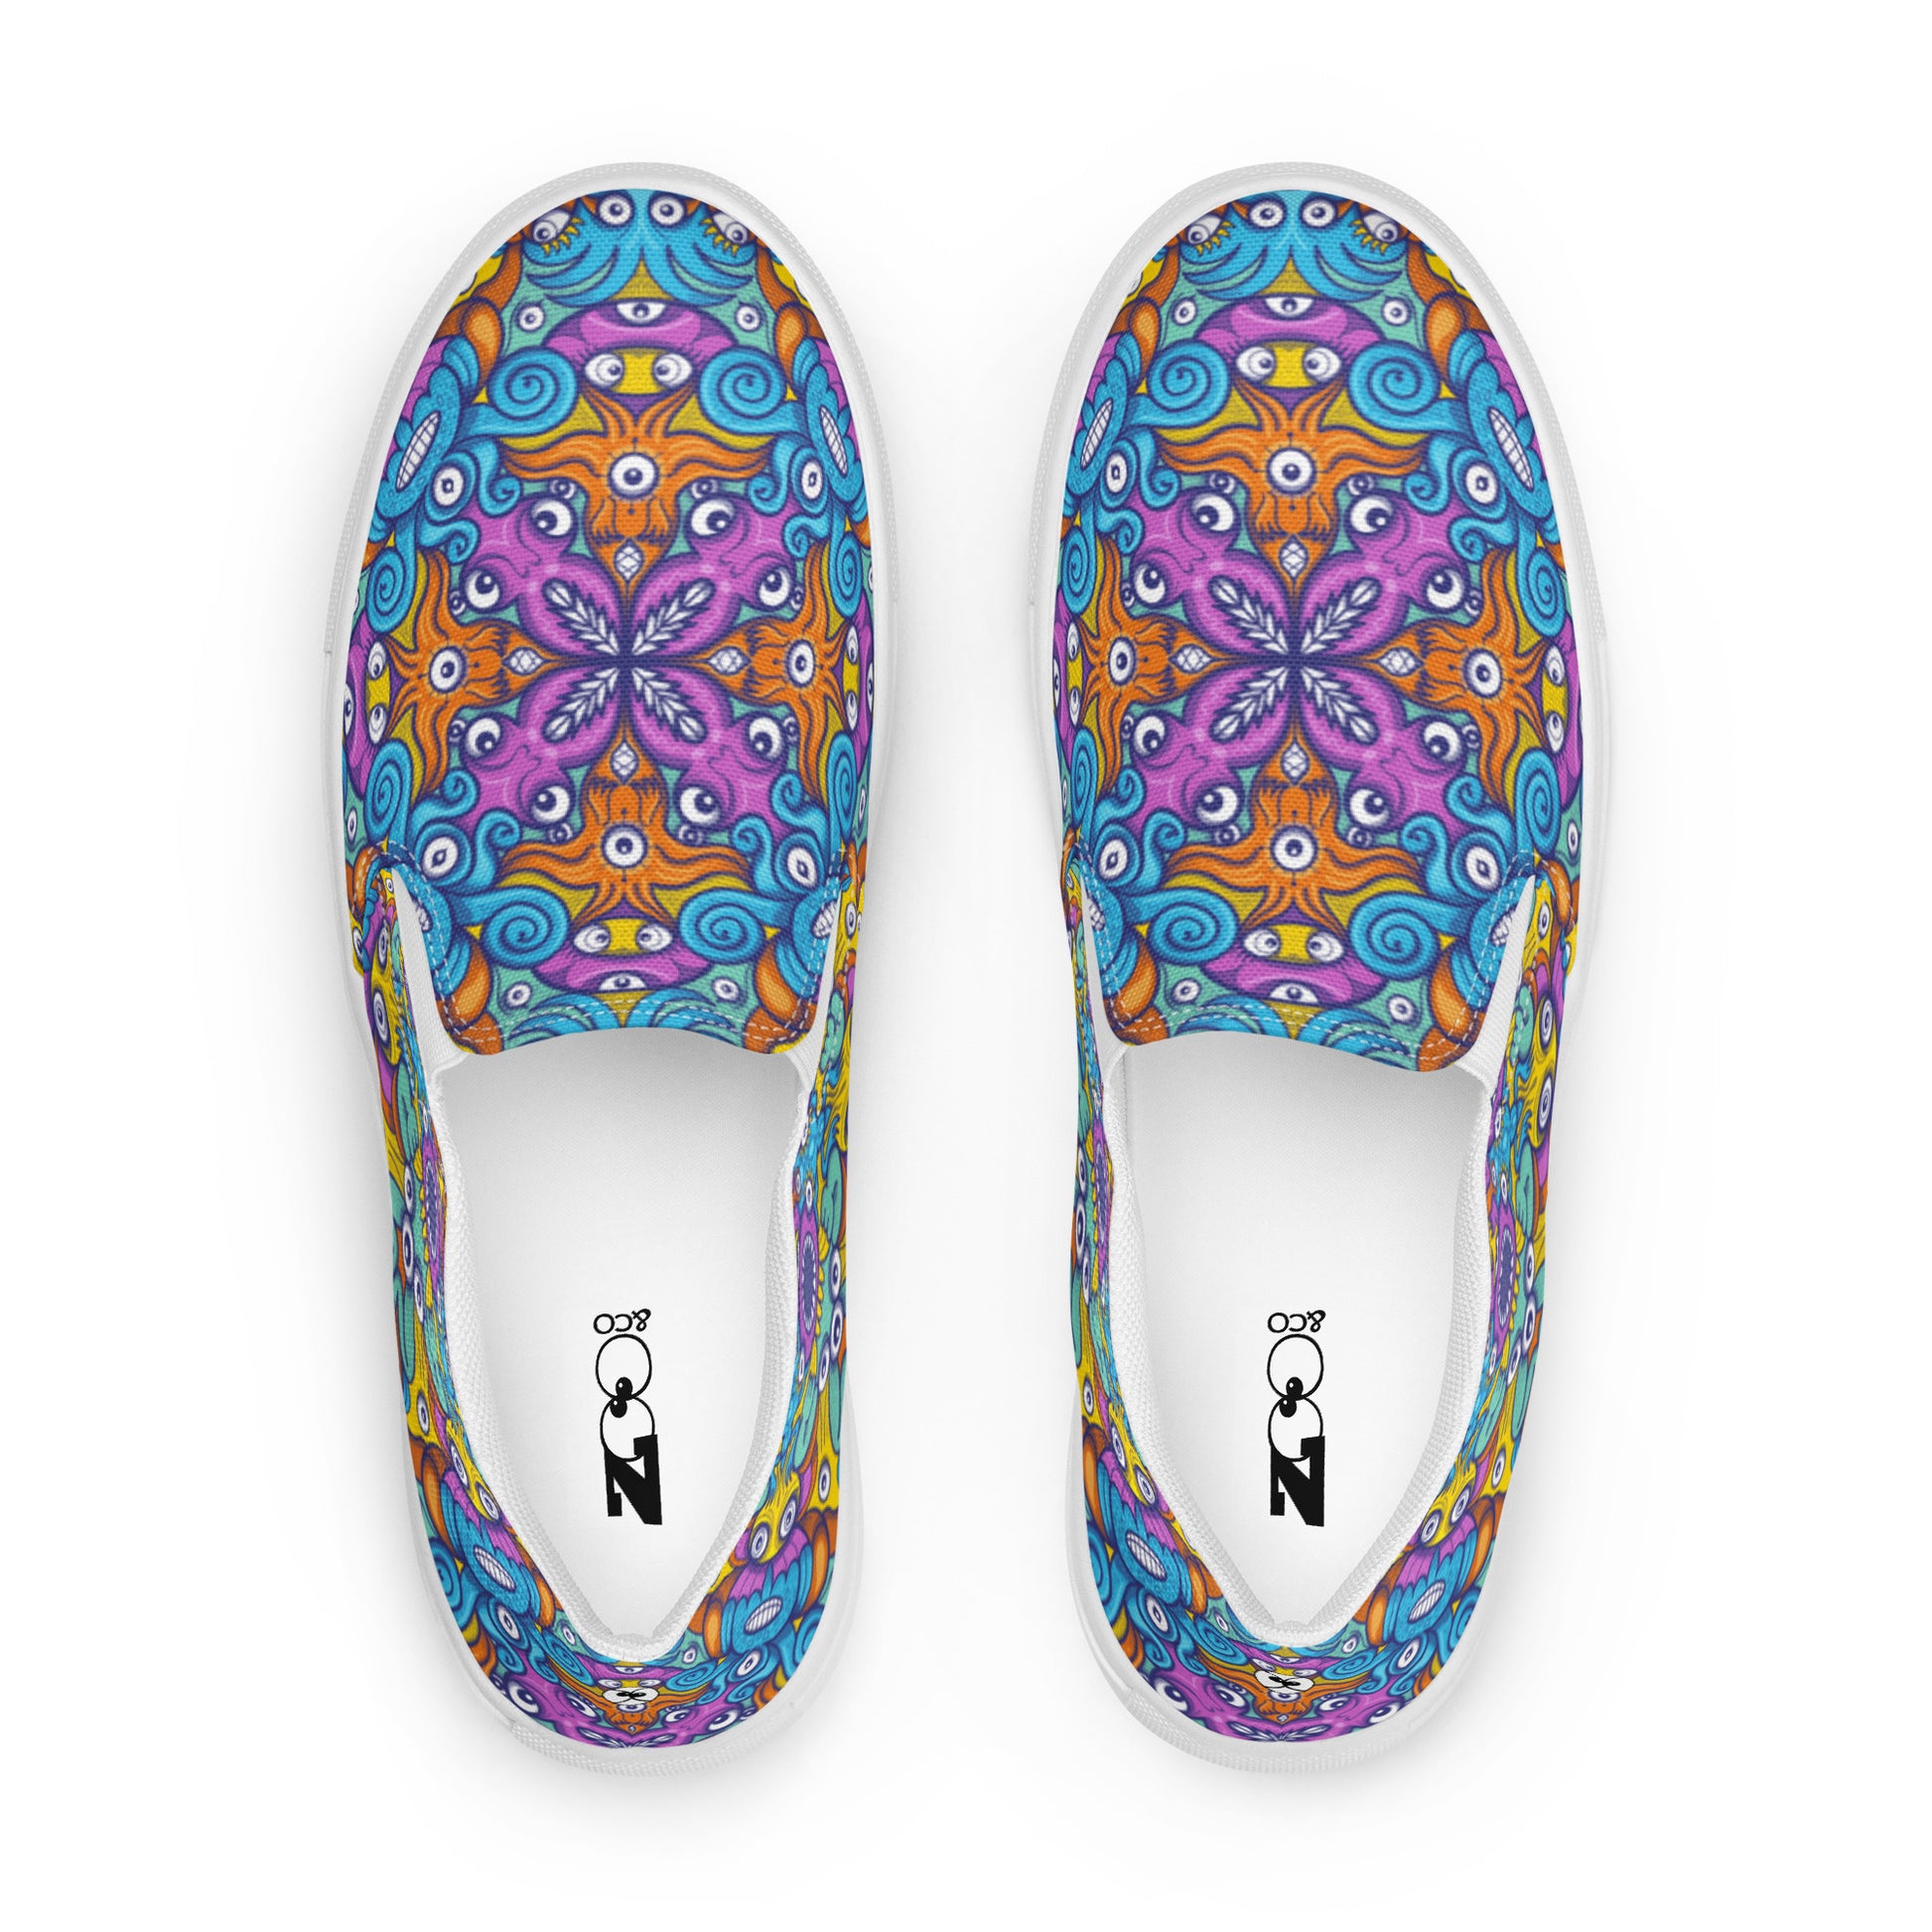 The ultimate sea beasts cast from the deep end of the ocean Men’s slip-on canvas shoes. Top view